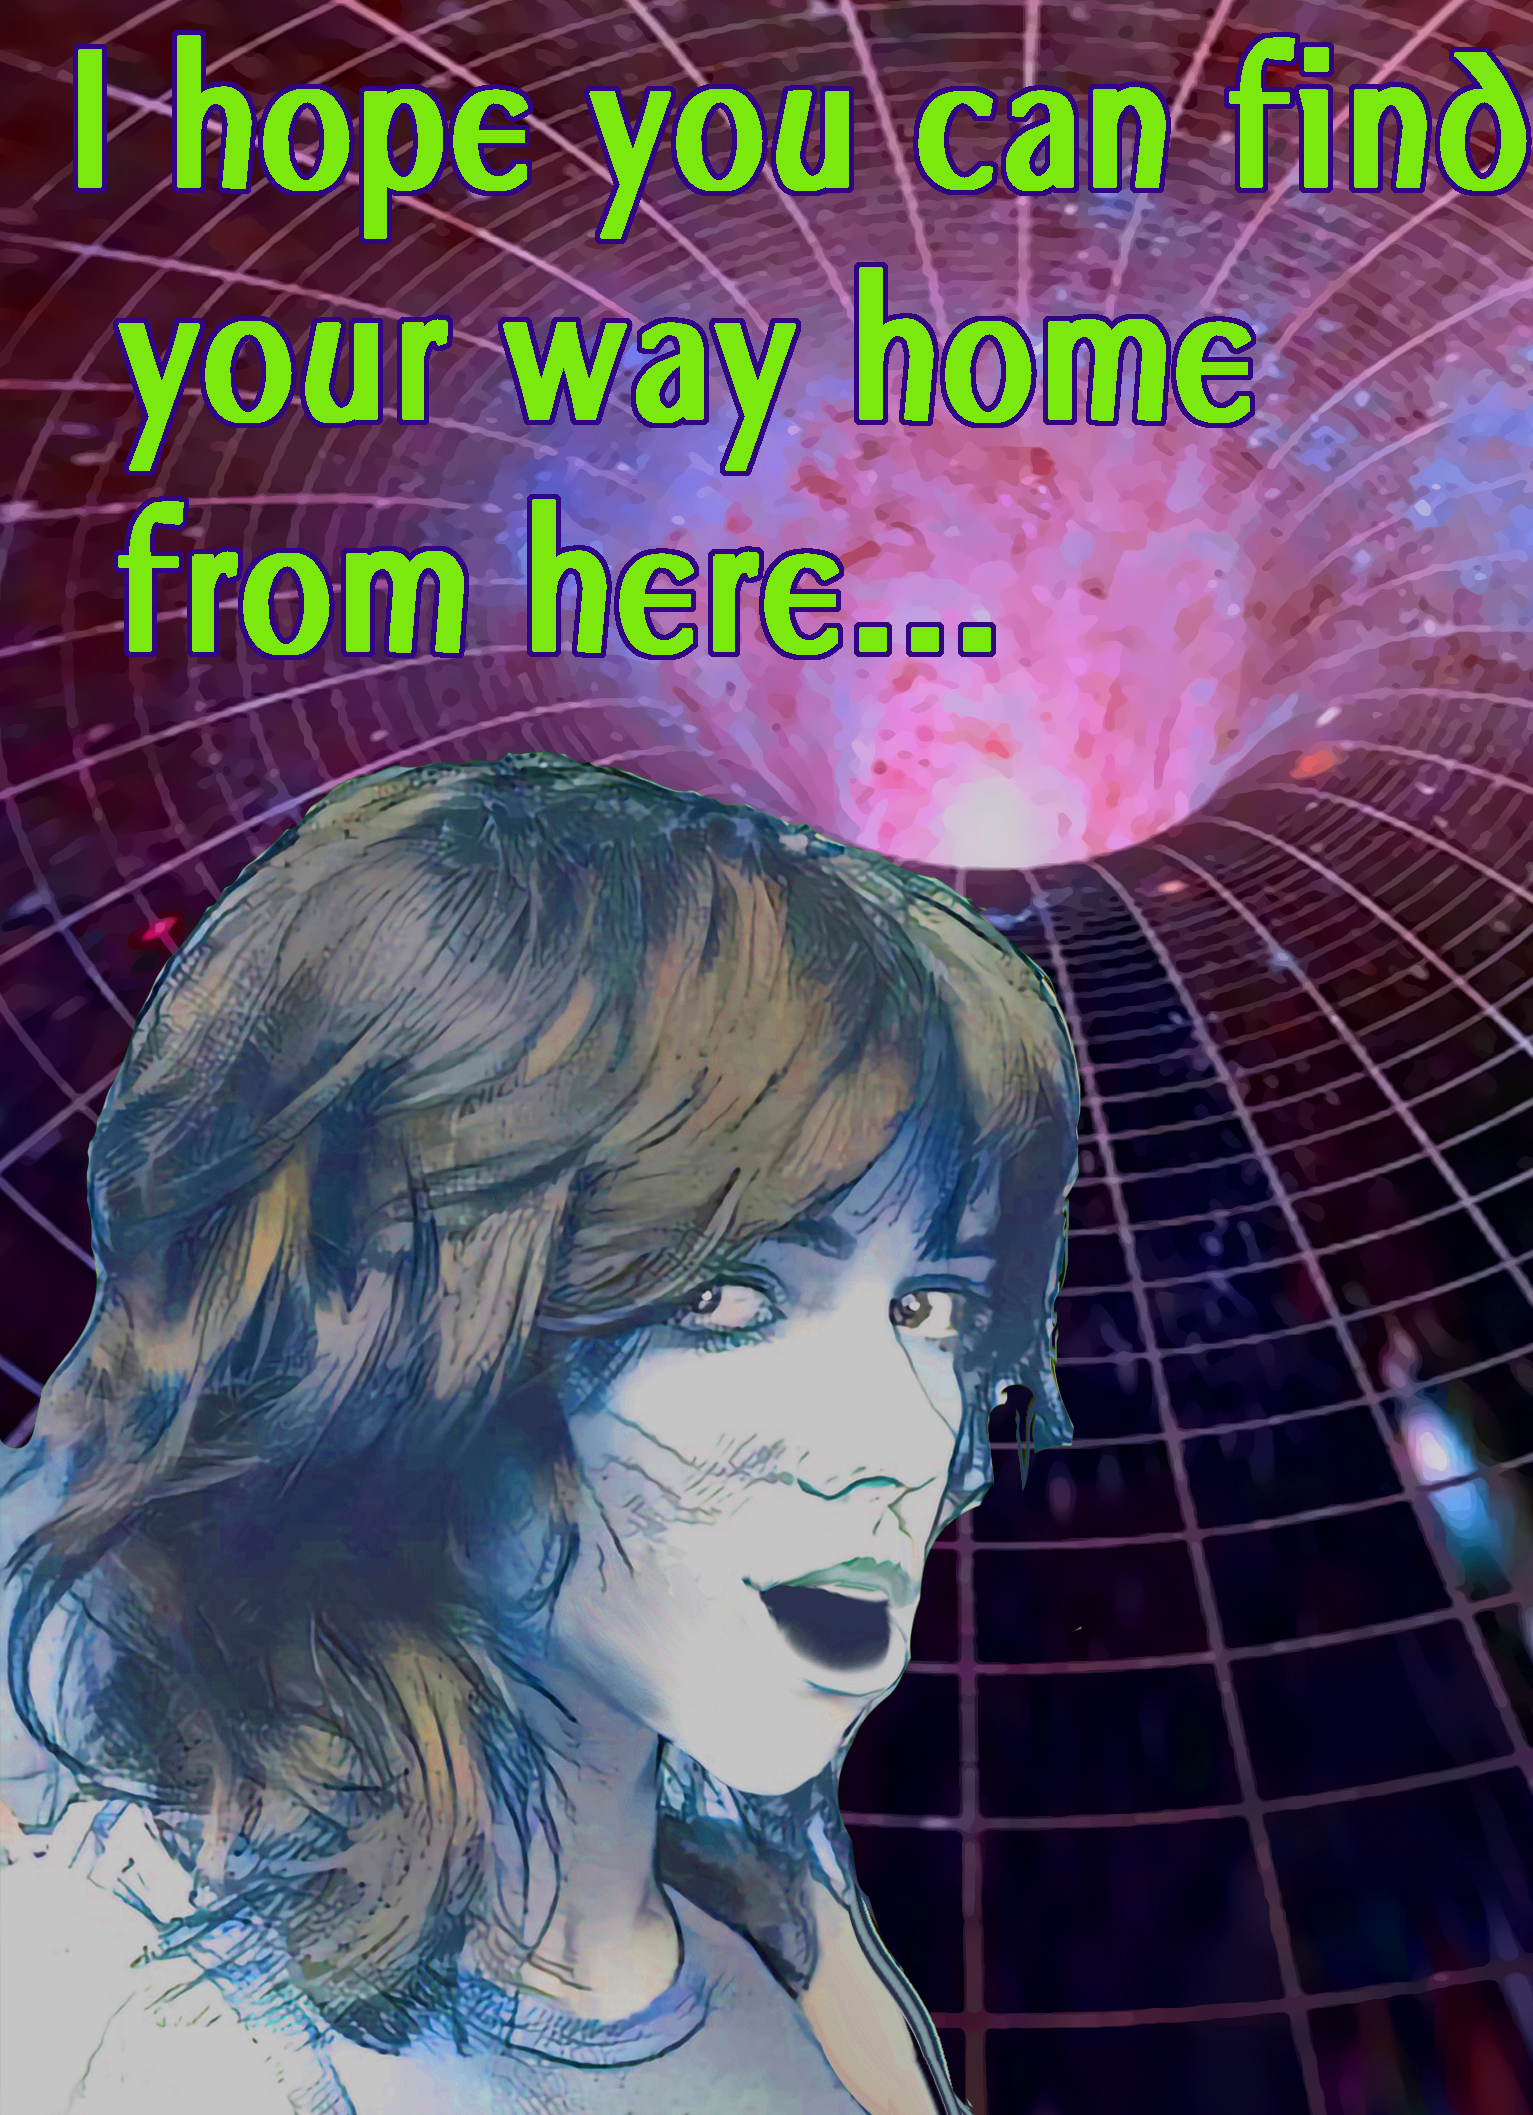 HTML girl with caption, I hope you can find your way home from here